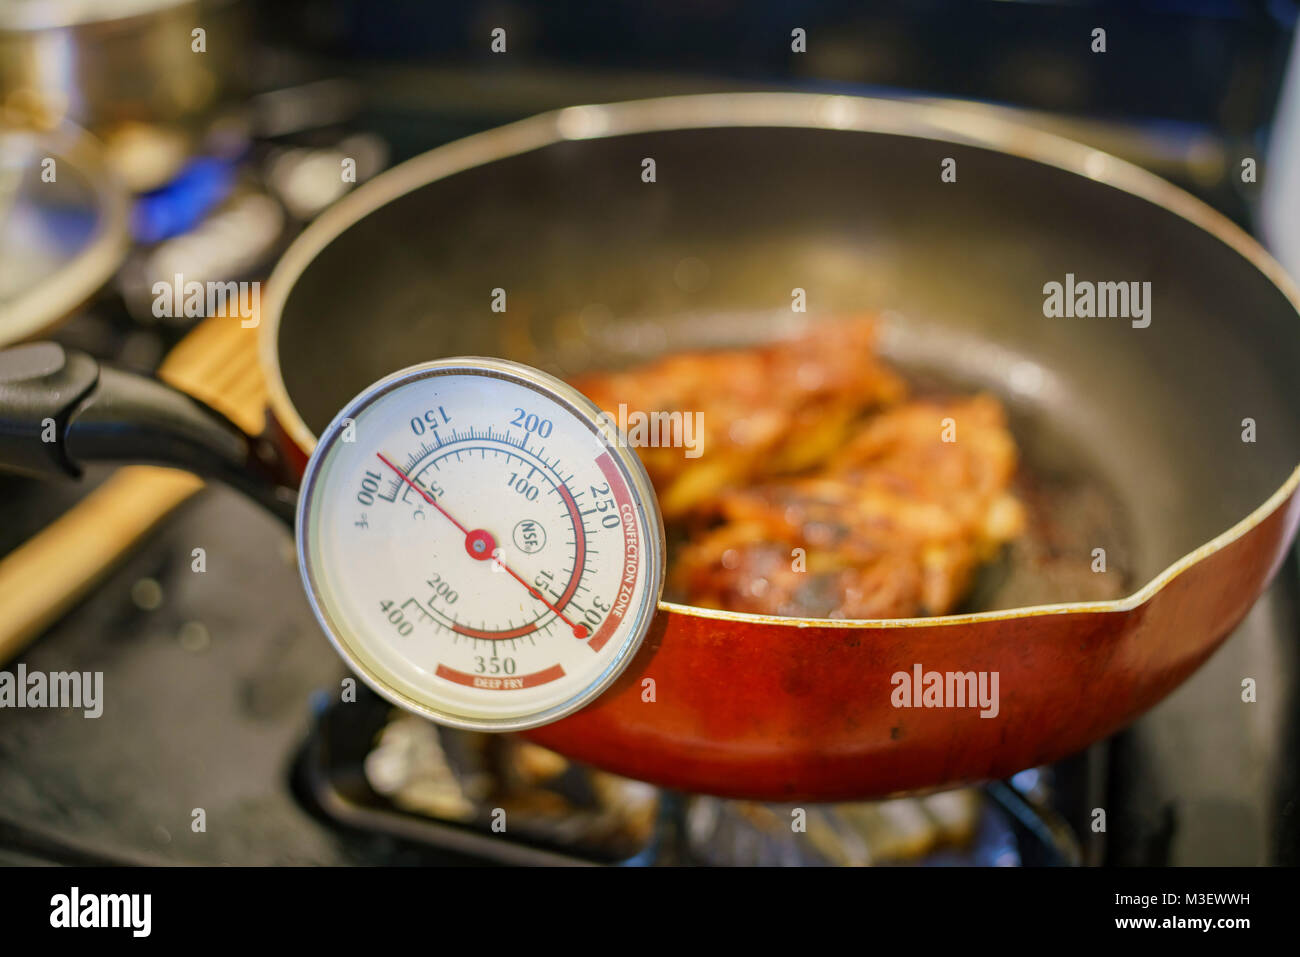 https://c8.alamy.com/comp/M3EWWH/checking-the-temperature-with-thermometer-of-fry-chicken-at-home-los-M3EWWH.jpg